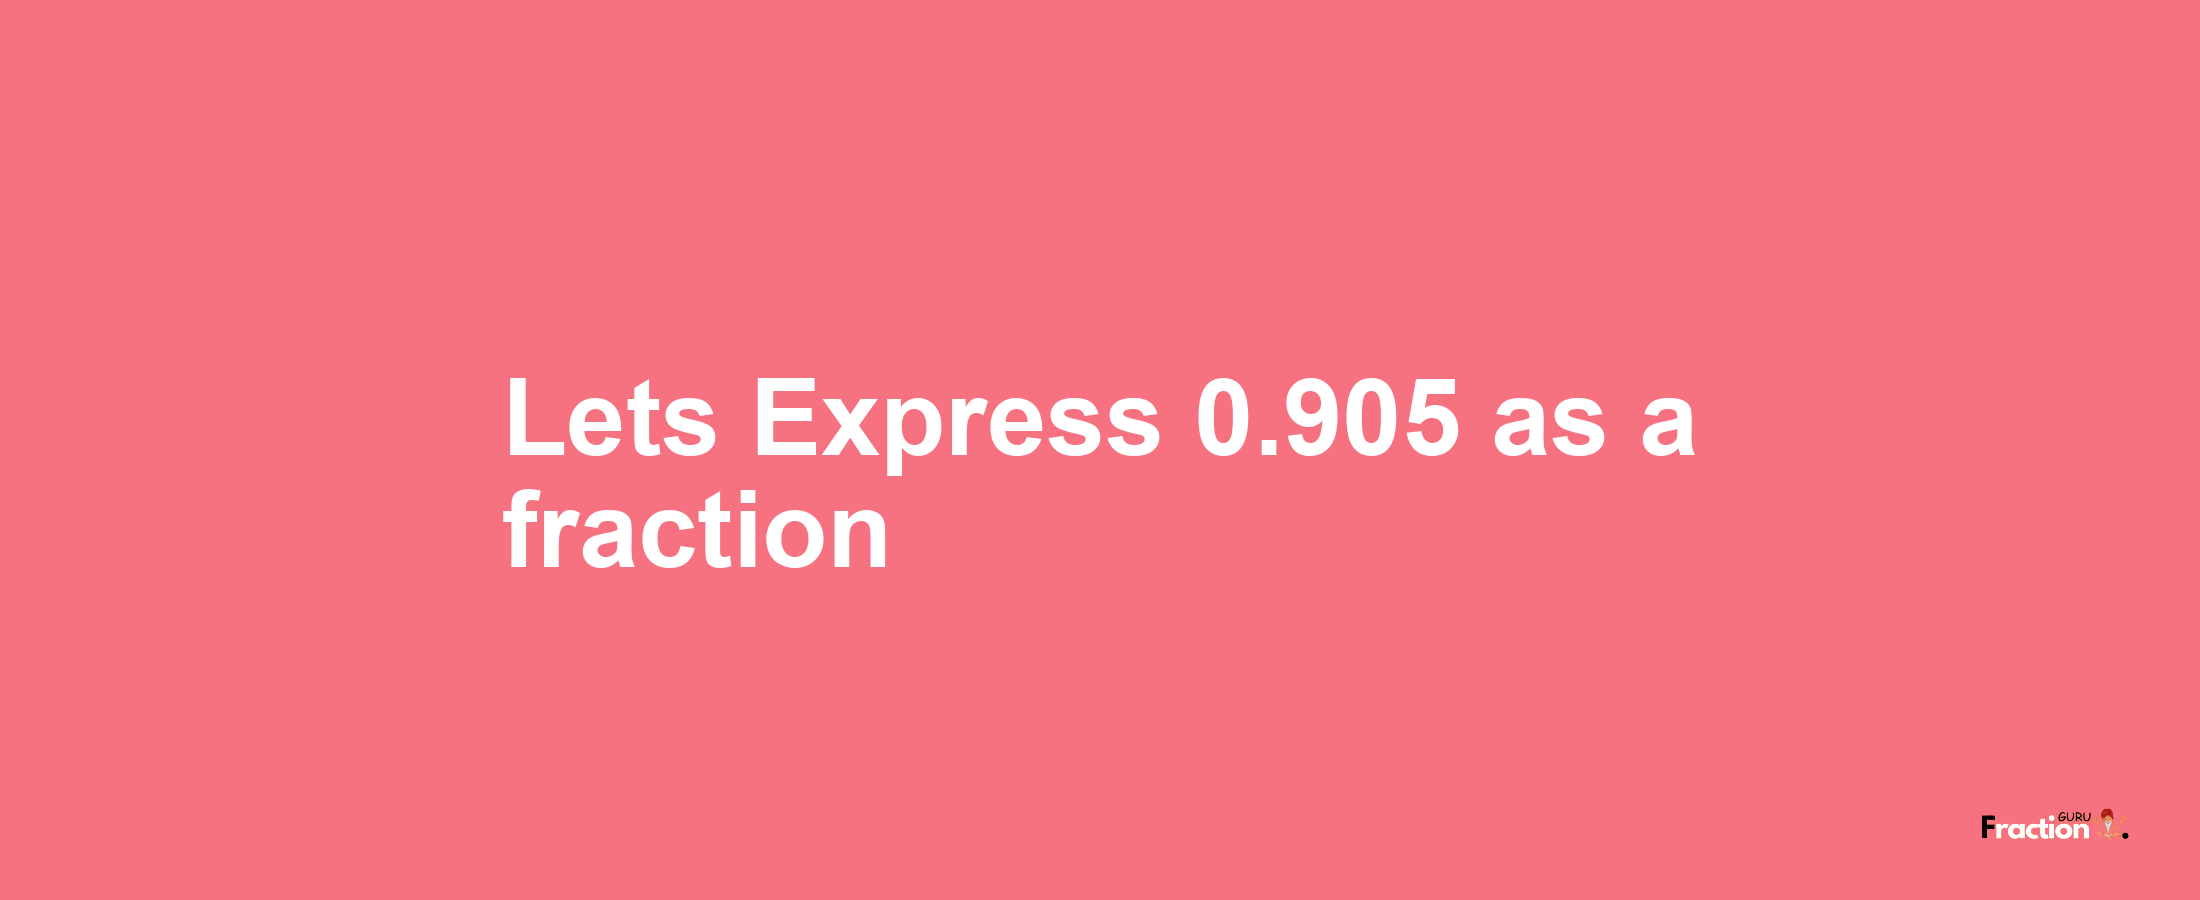 Lets Express 0.905 as afraction